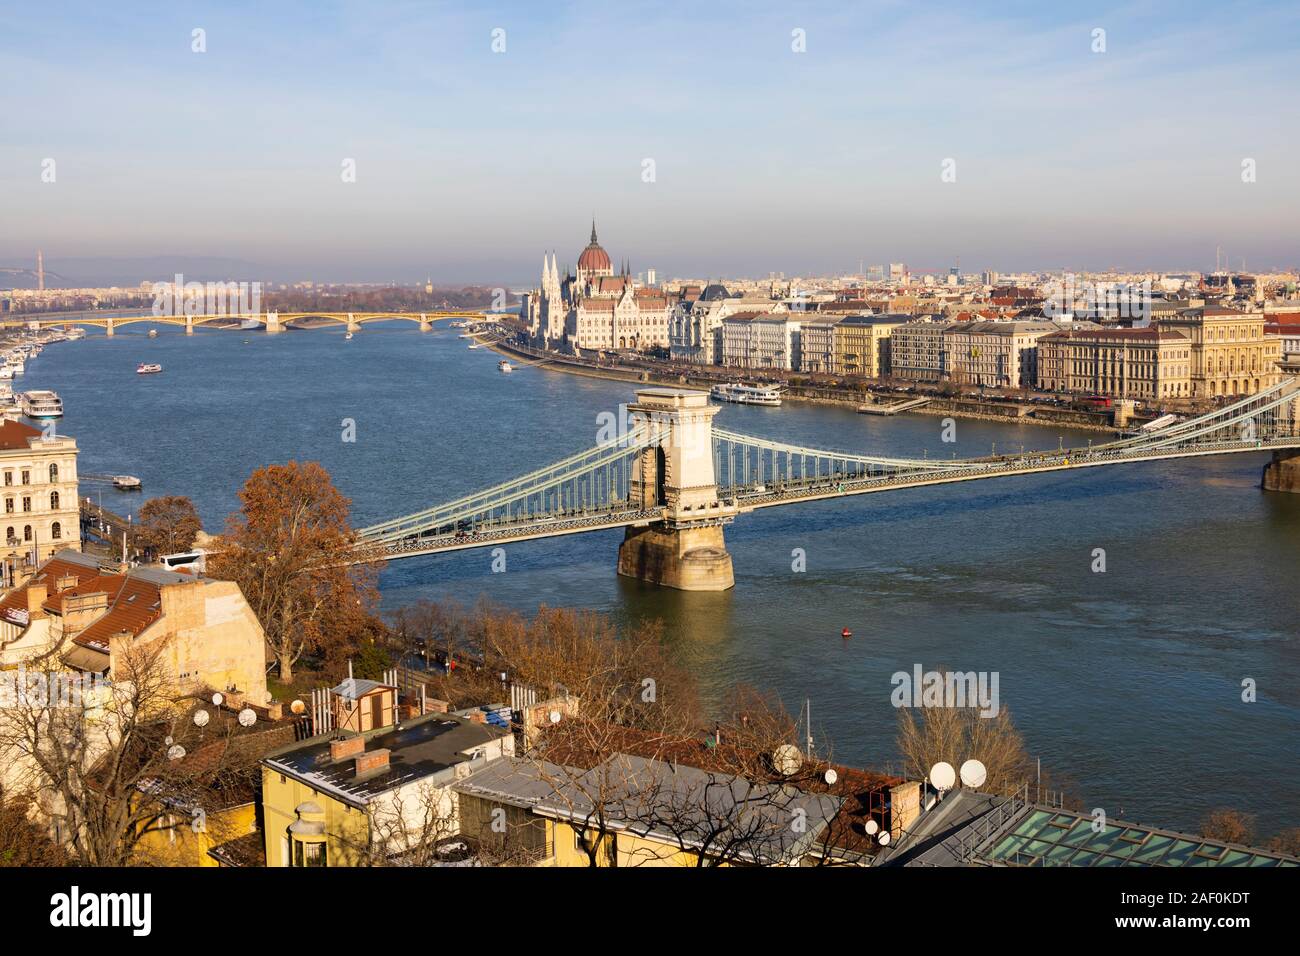 The Chain Bridge and Parliament building and River Danube. Winter in Budapest, Hungary. December 2019 Stock Photo